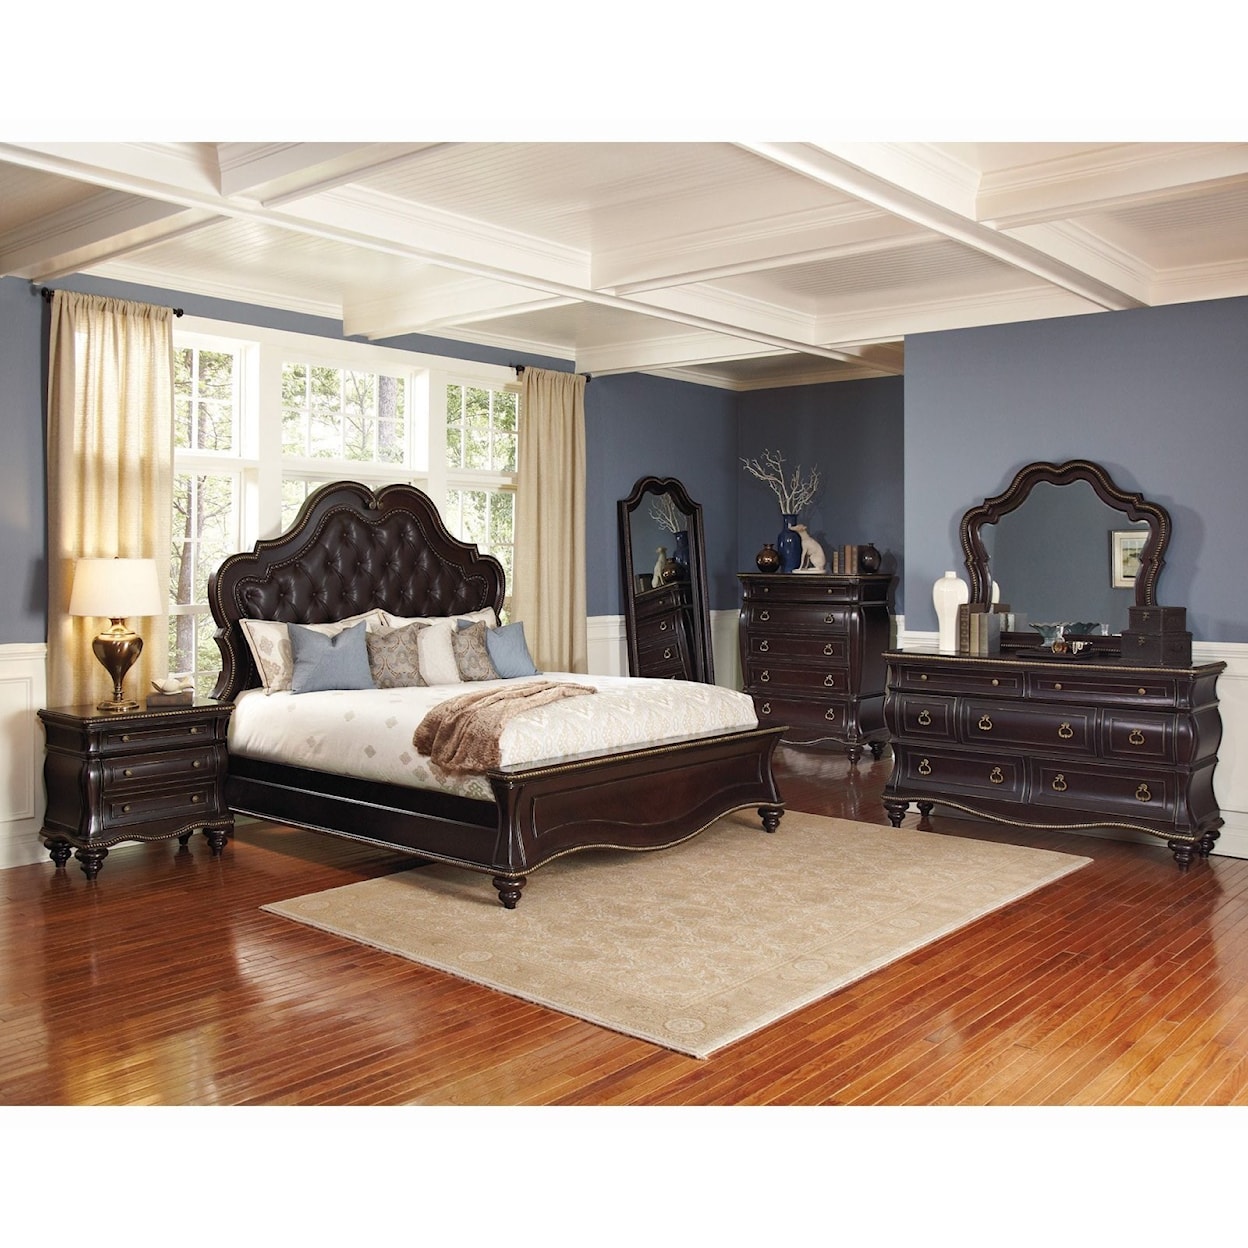 Avalon Furniture Palisades Queen Bedroom Group